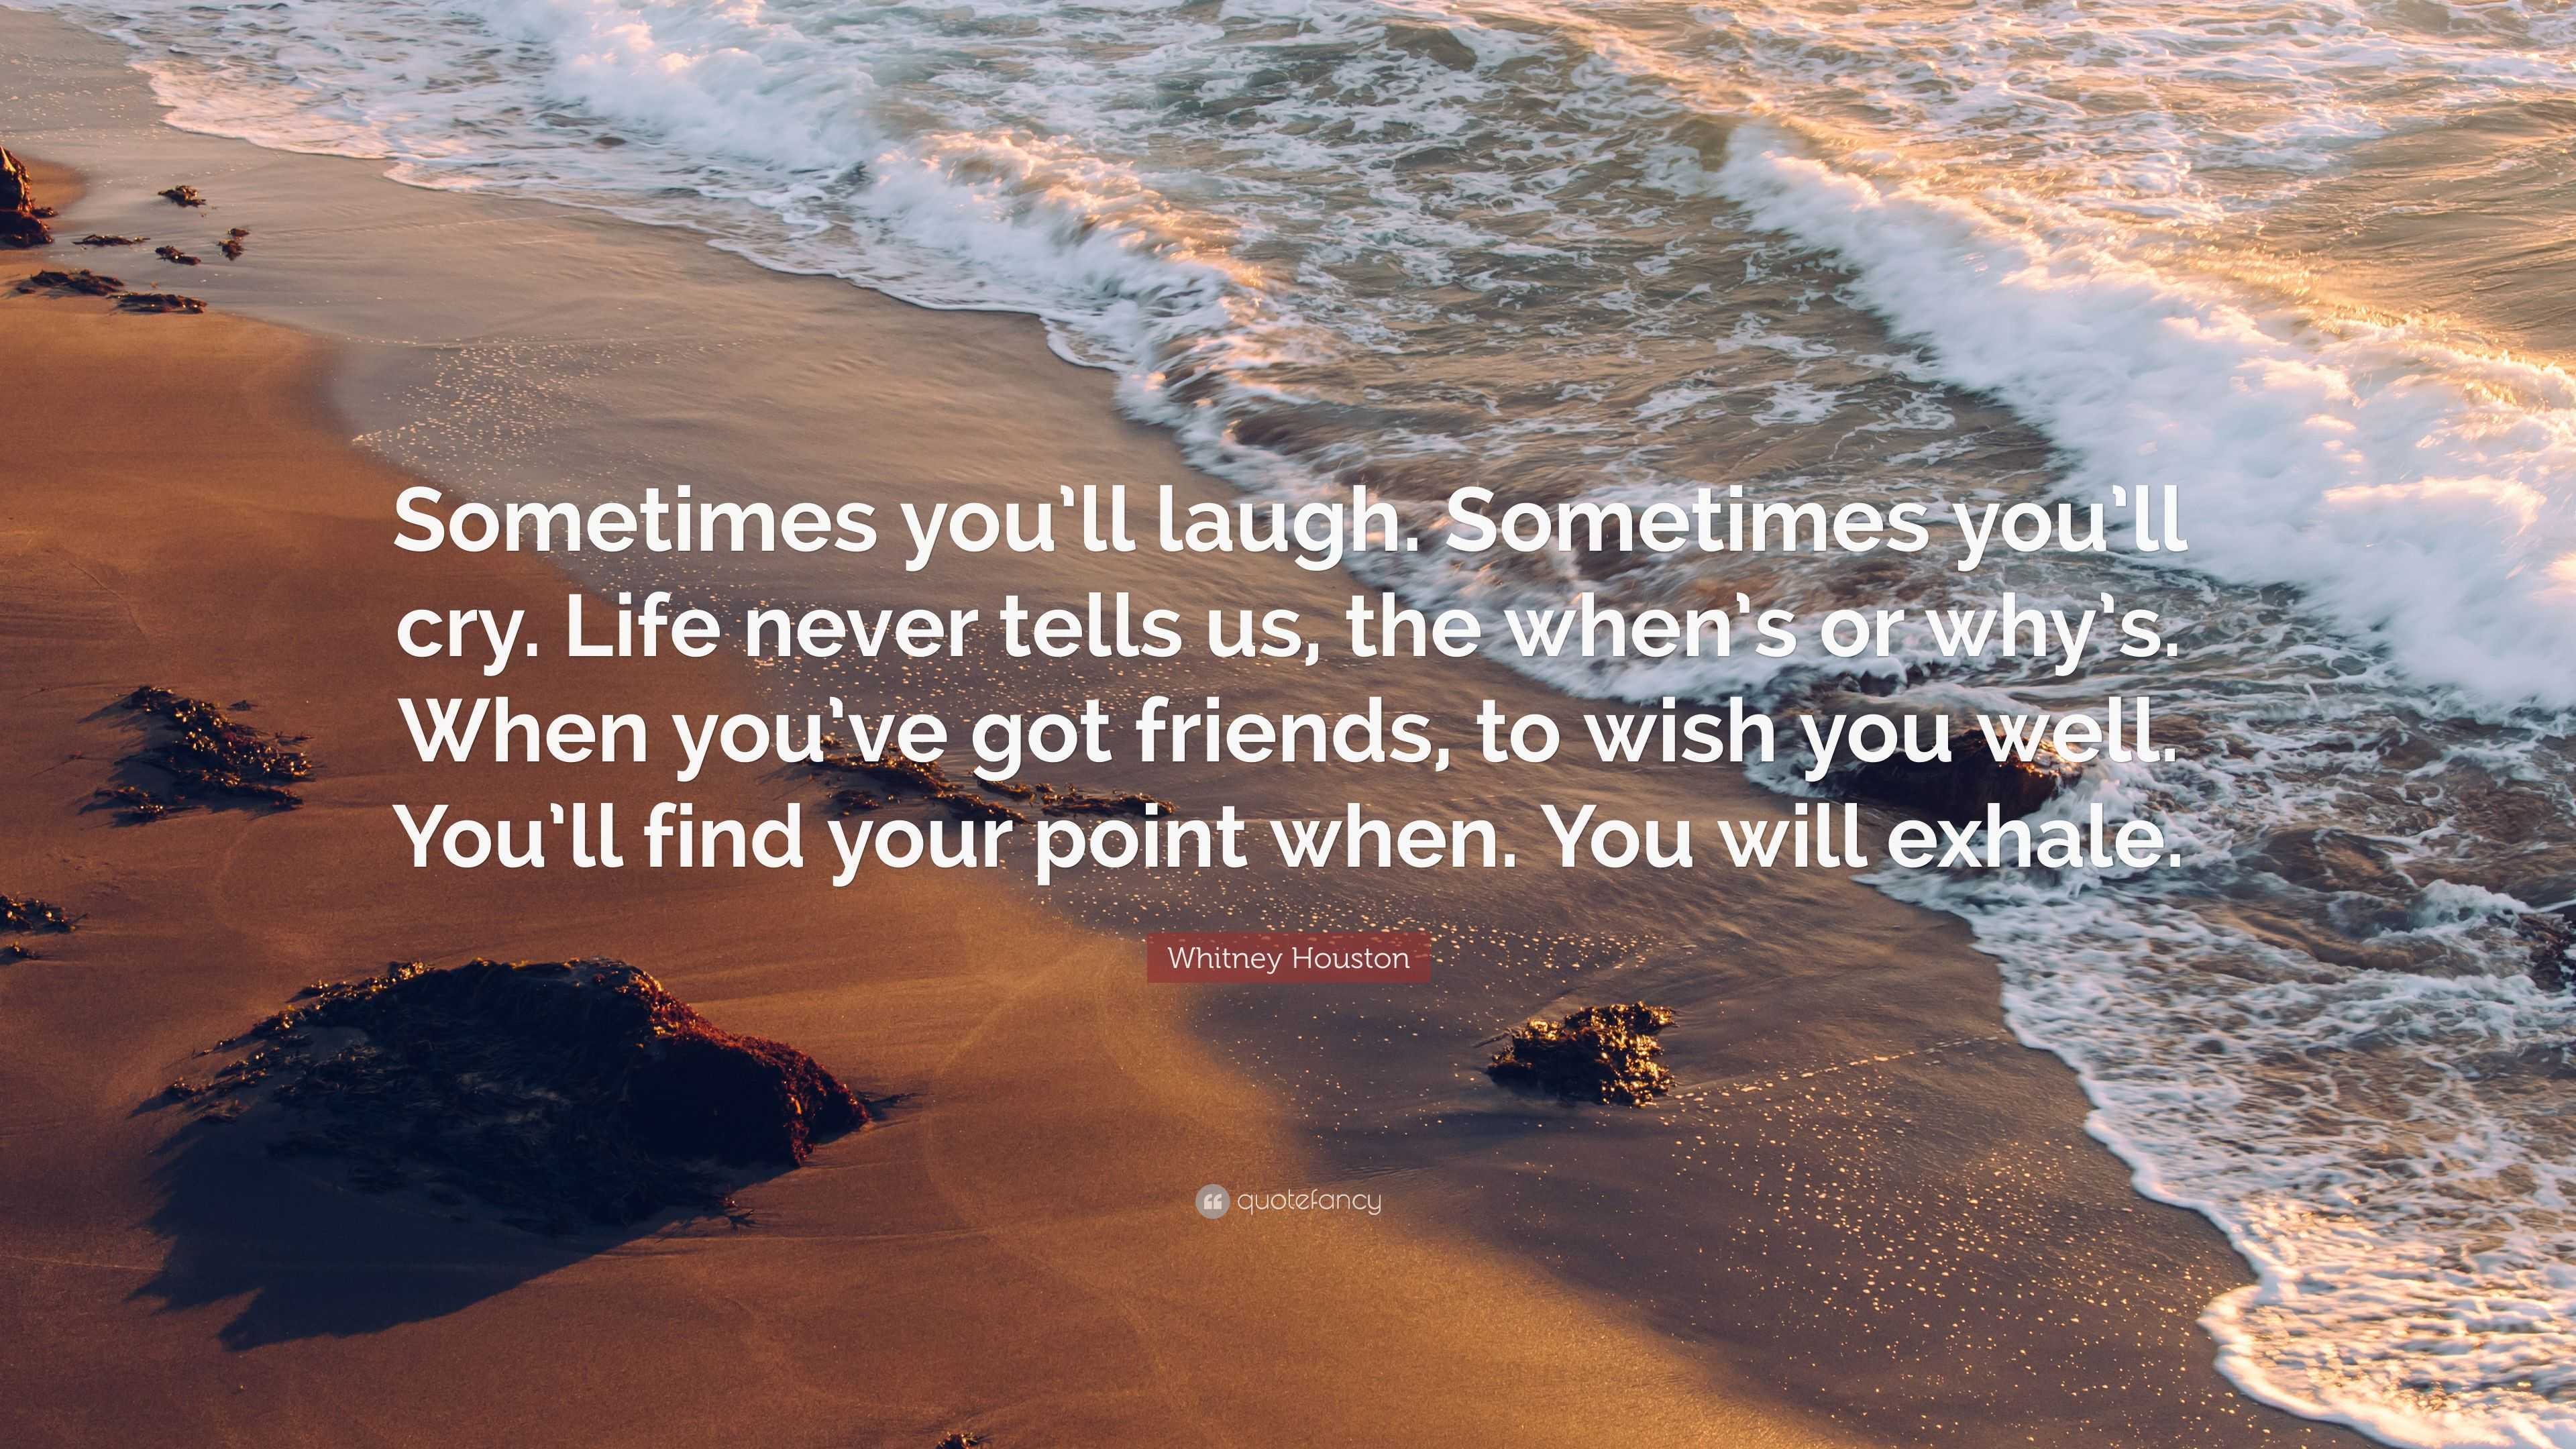 Whitney Houston Quote: “Sometimes you’ll laugh. Sometimes you’ll cry ...